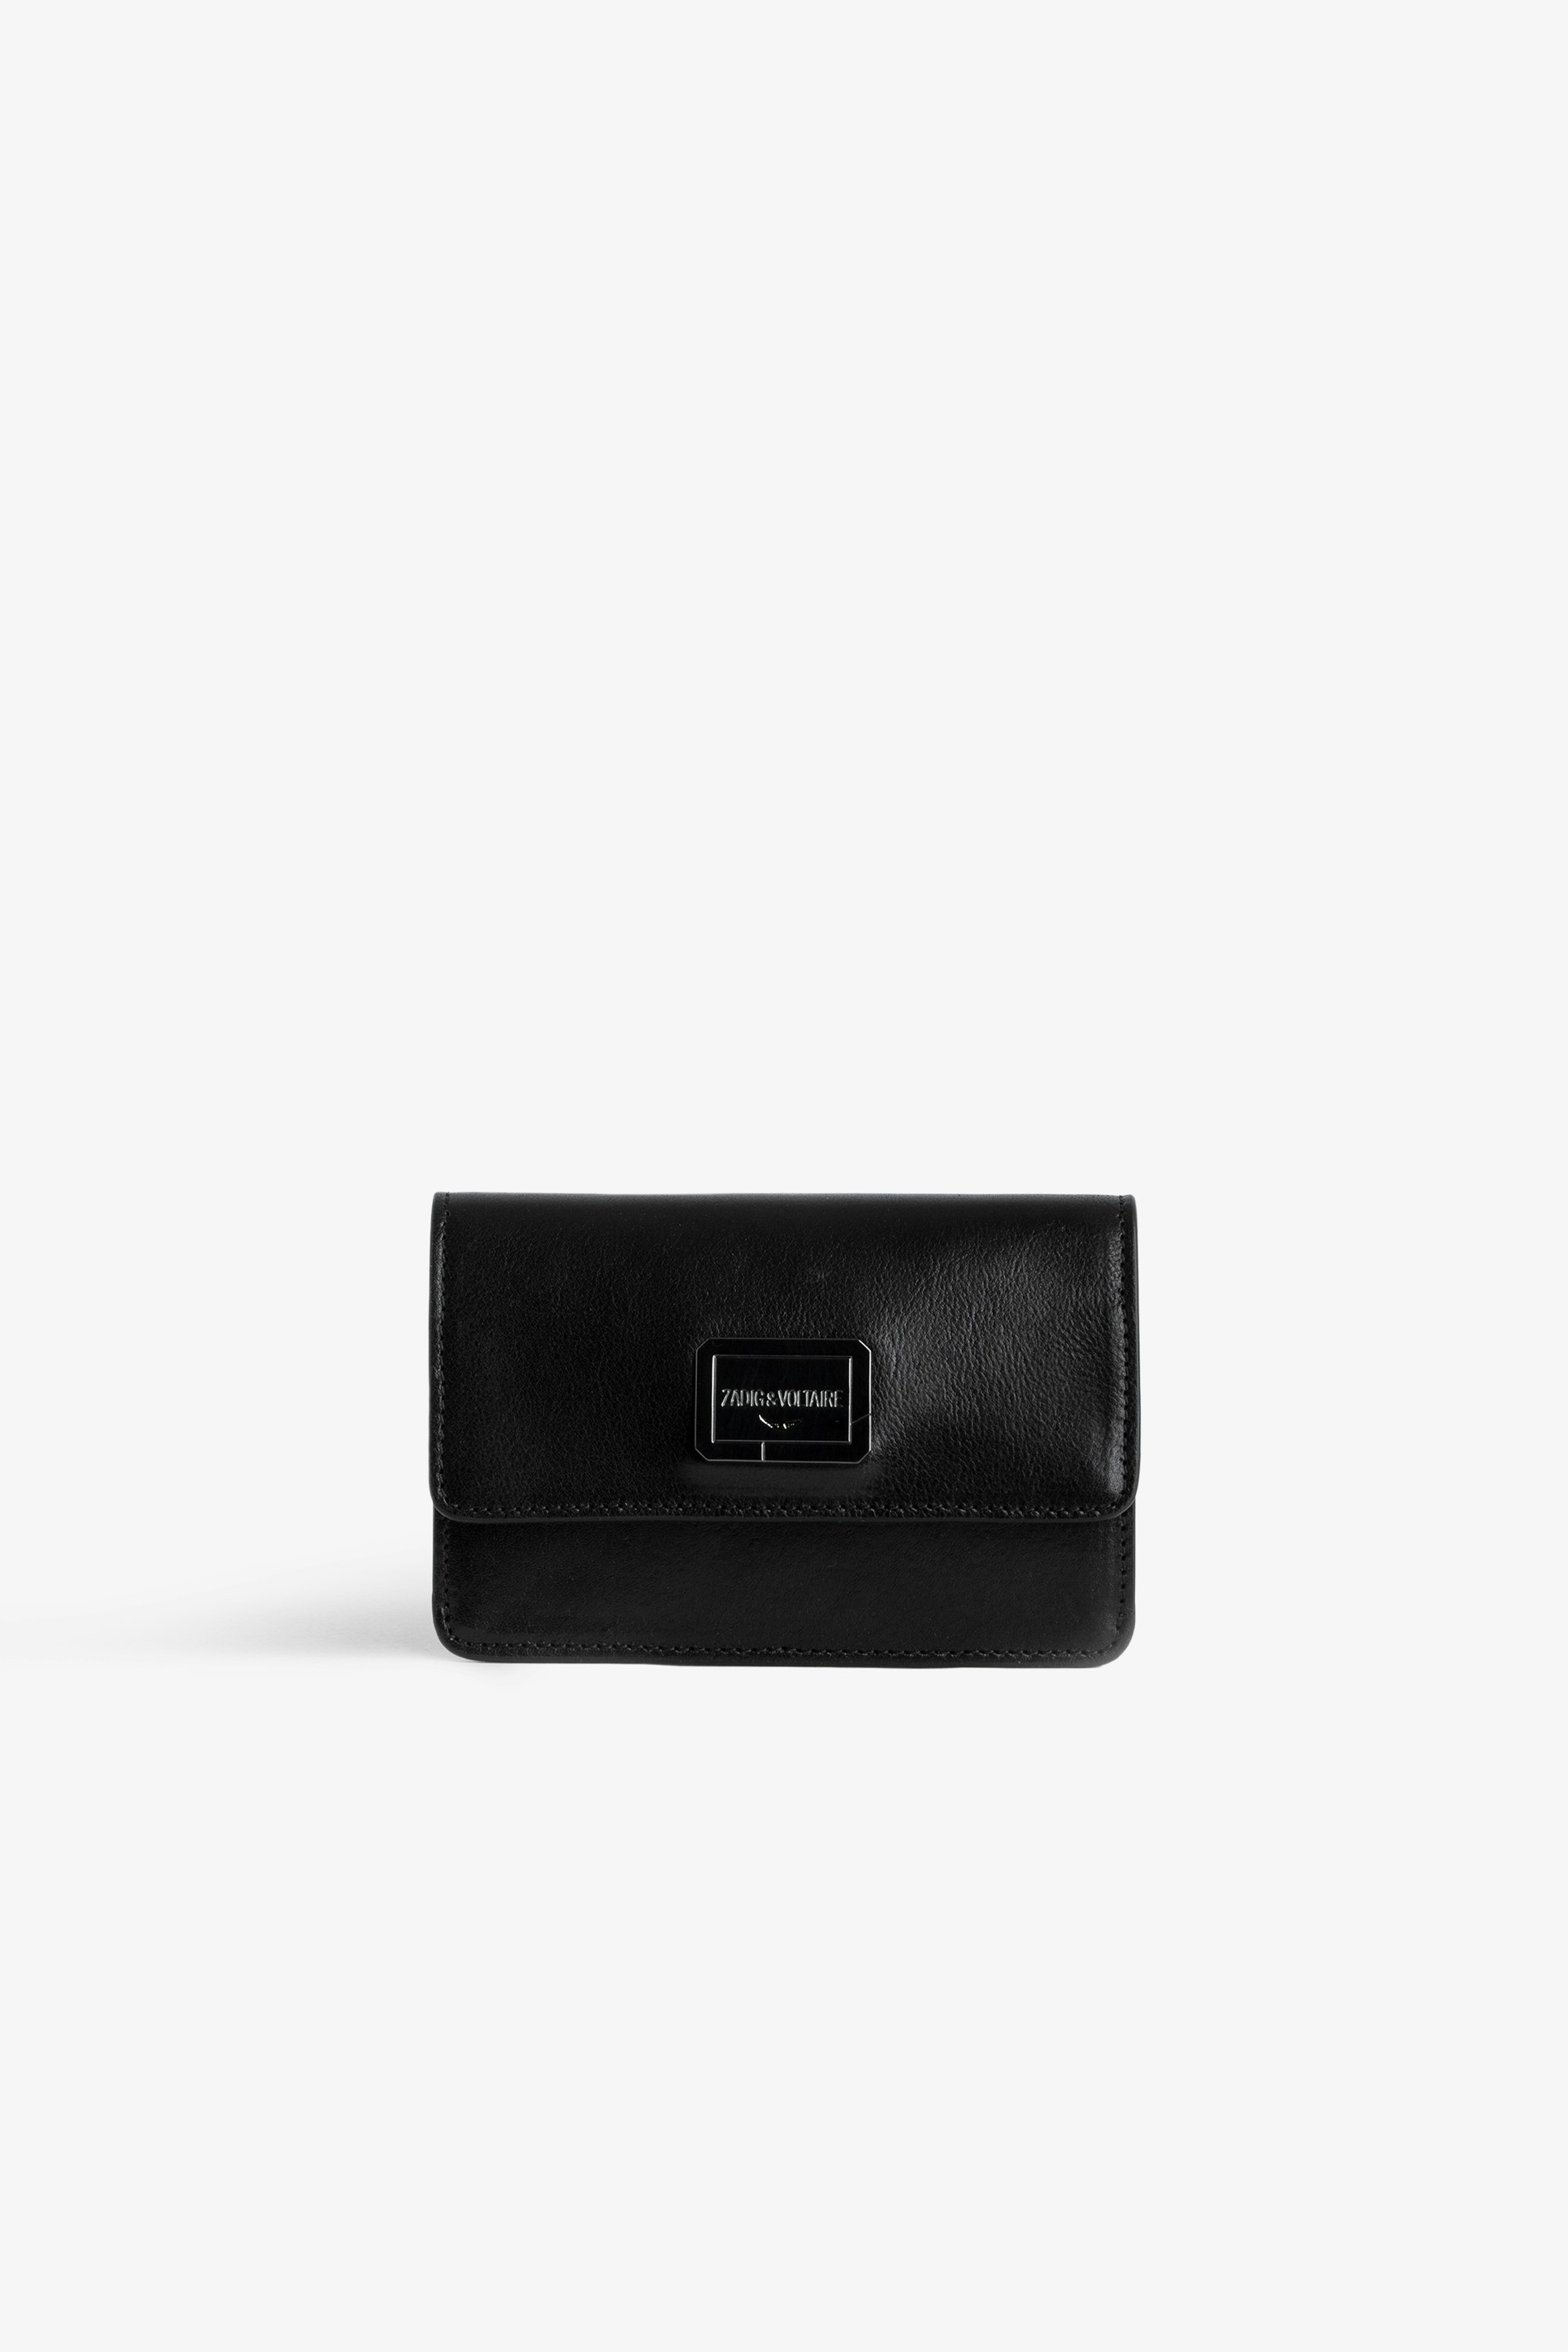 Le Cecilia Wallet Women's black leather wallet with flap